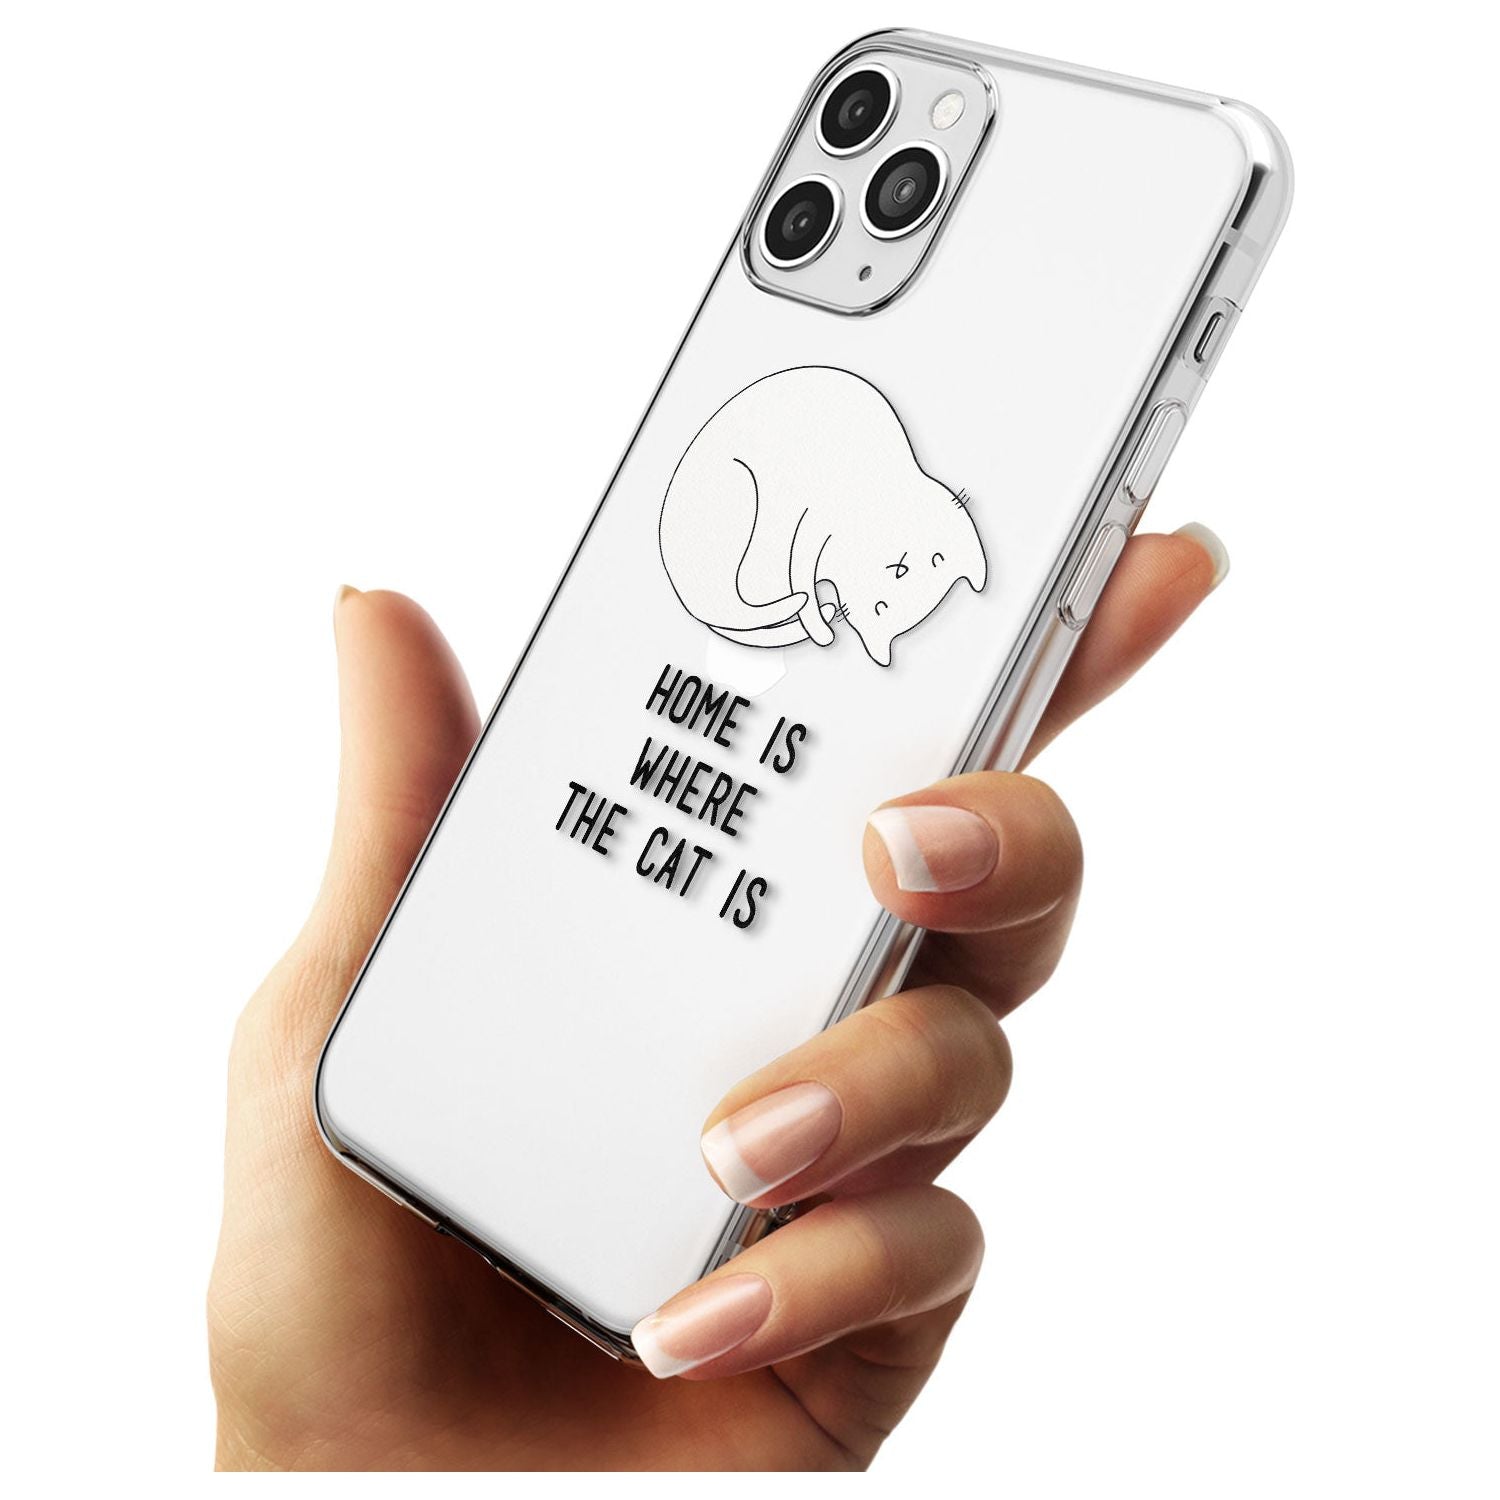 Home Is Where the Cat is Black Impact Phone Case for iPhone 11 Pro Max